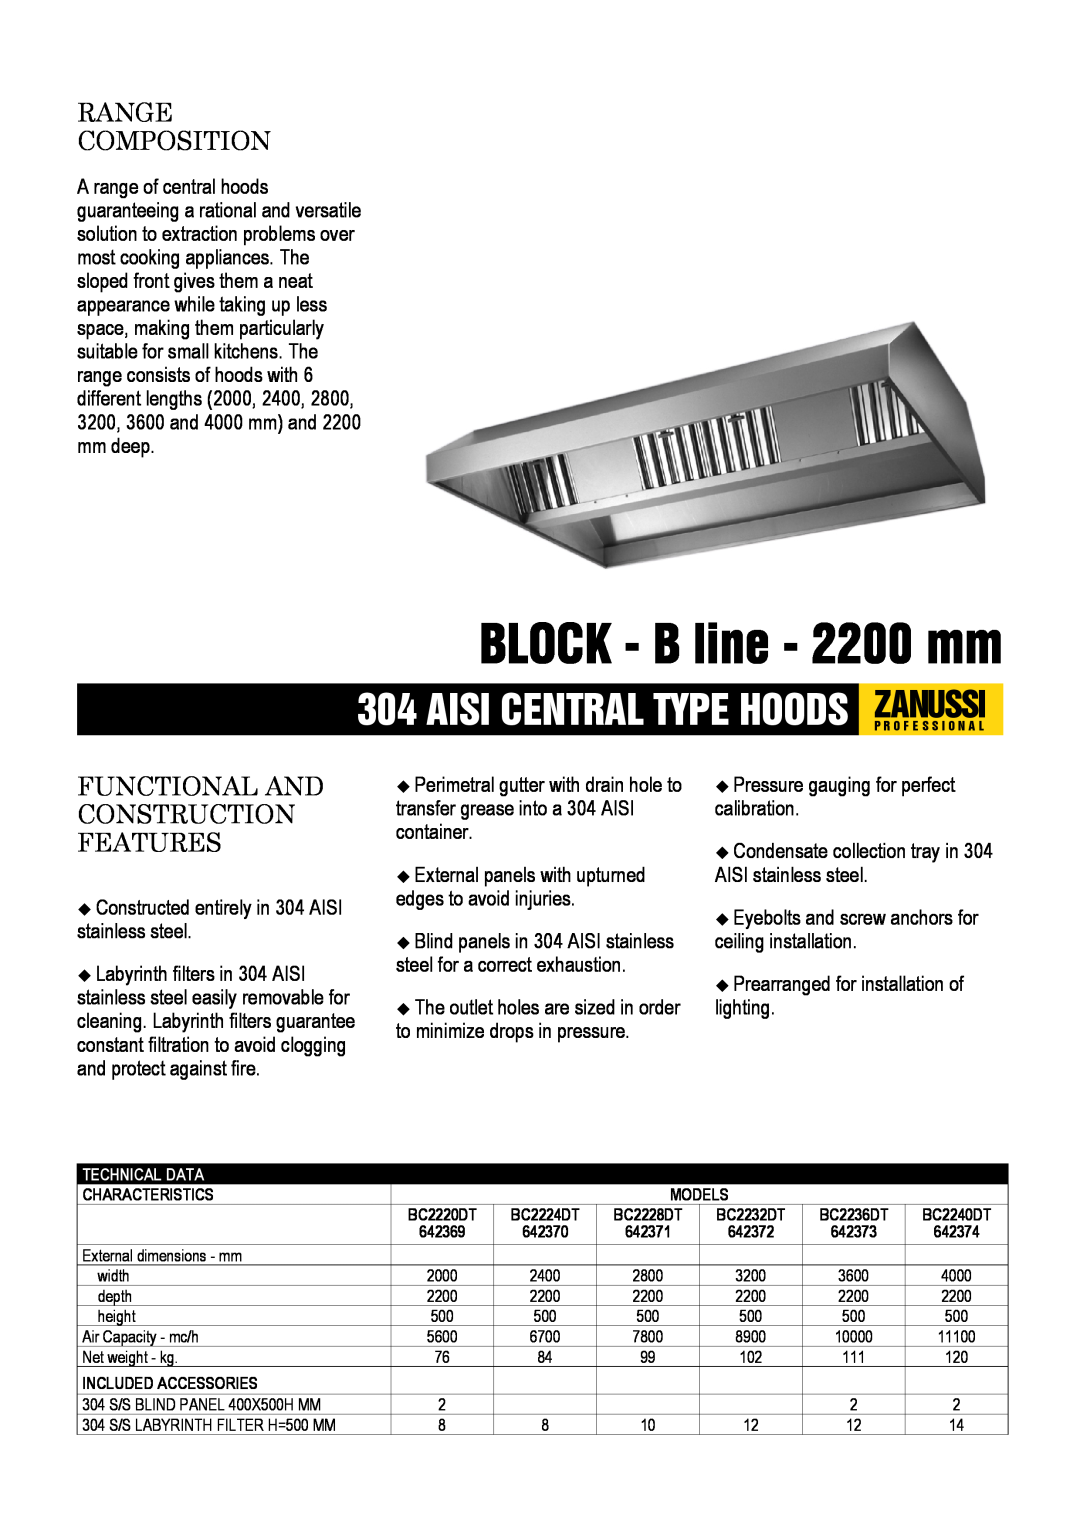 Zanussi 642370, 642374, 642373 dimensions BLOCK - B line - 2200 mm, Range Composition, Functional And Construction Features 